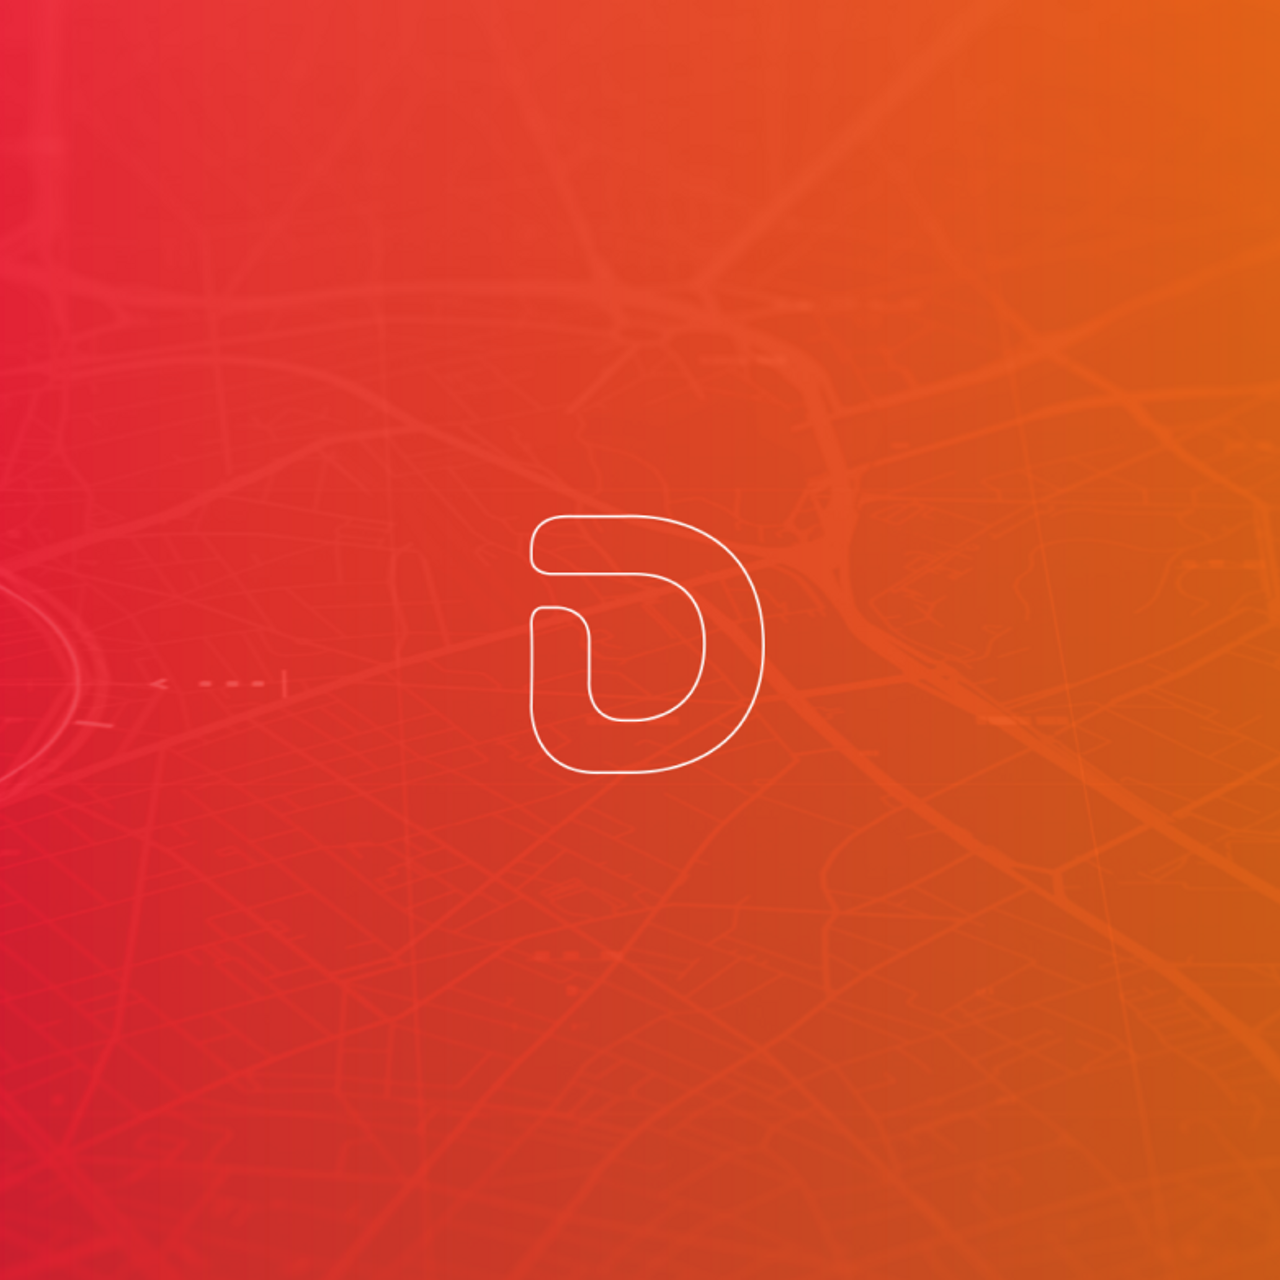 Stylised white 'D' logo on a red to orange gradient background with a map-like overlay, symbolising the 'Data Driven Logistics' brand.